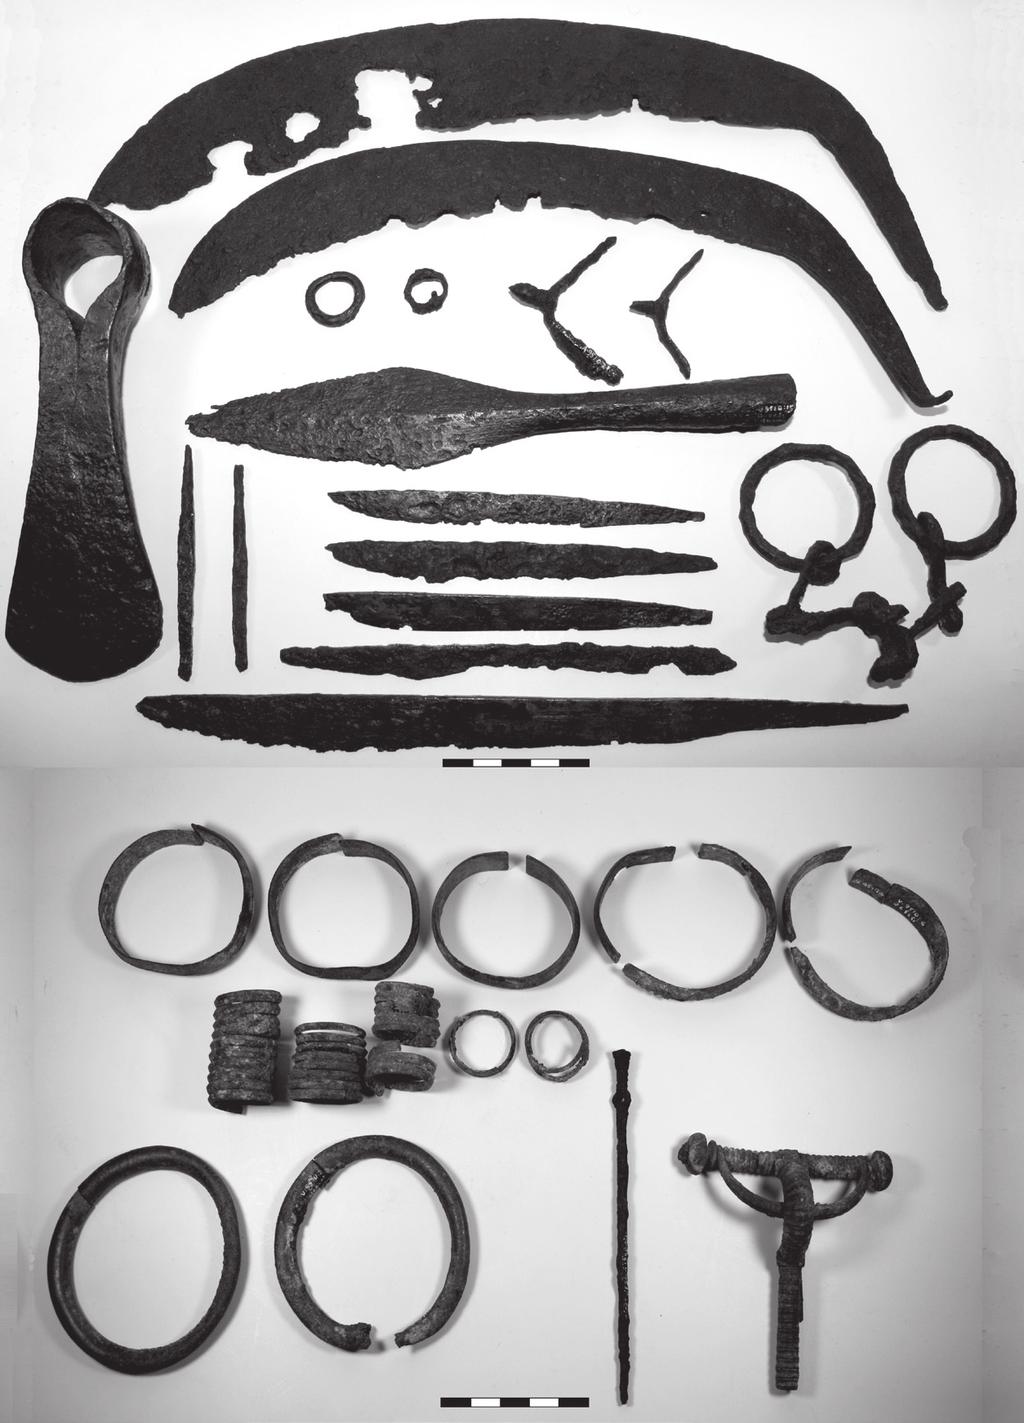 Examples of Latvian Middle Iron Age wealth deposits from burial